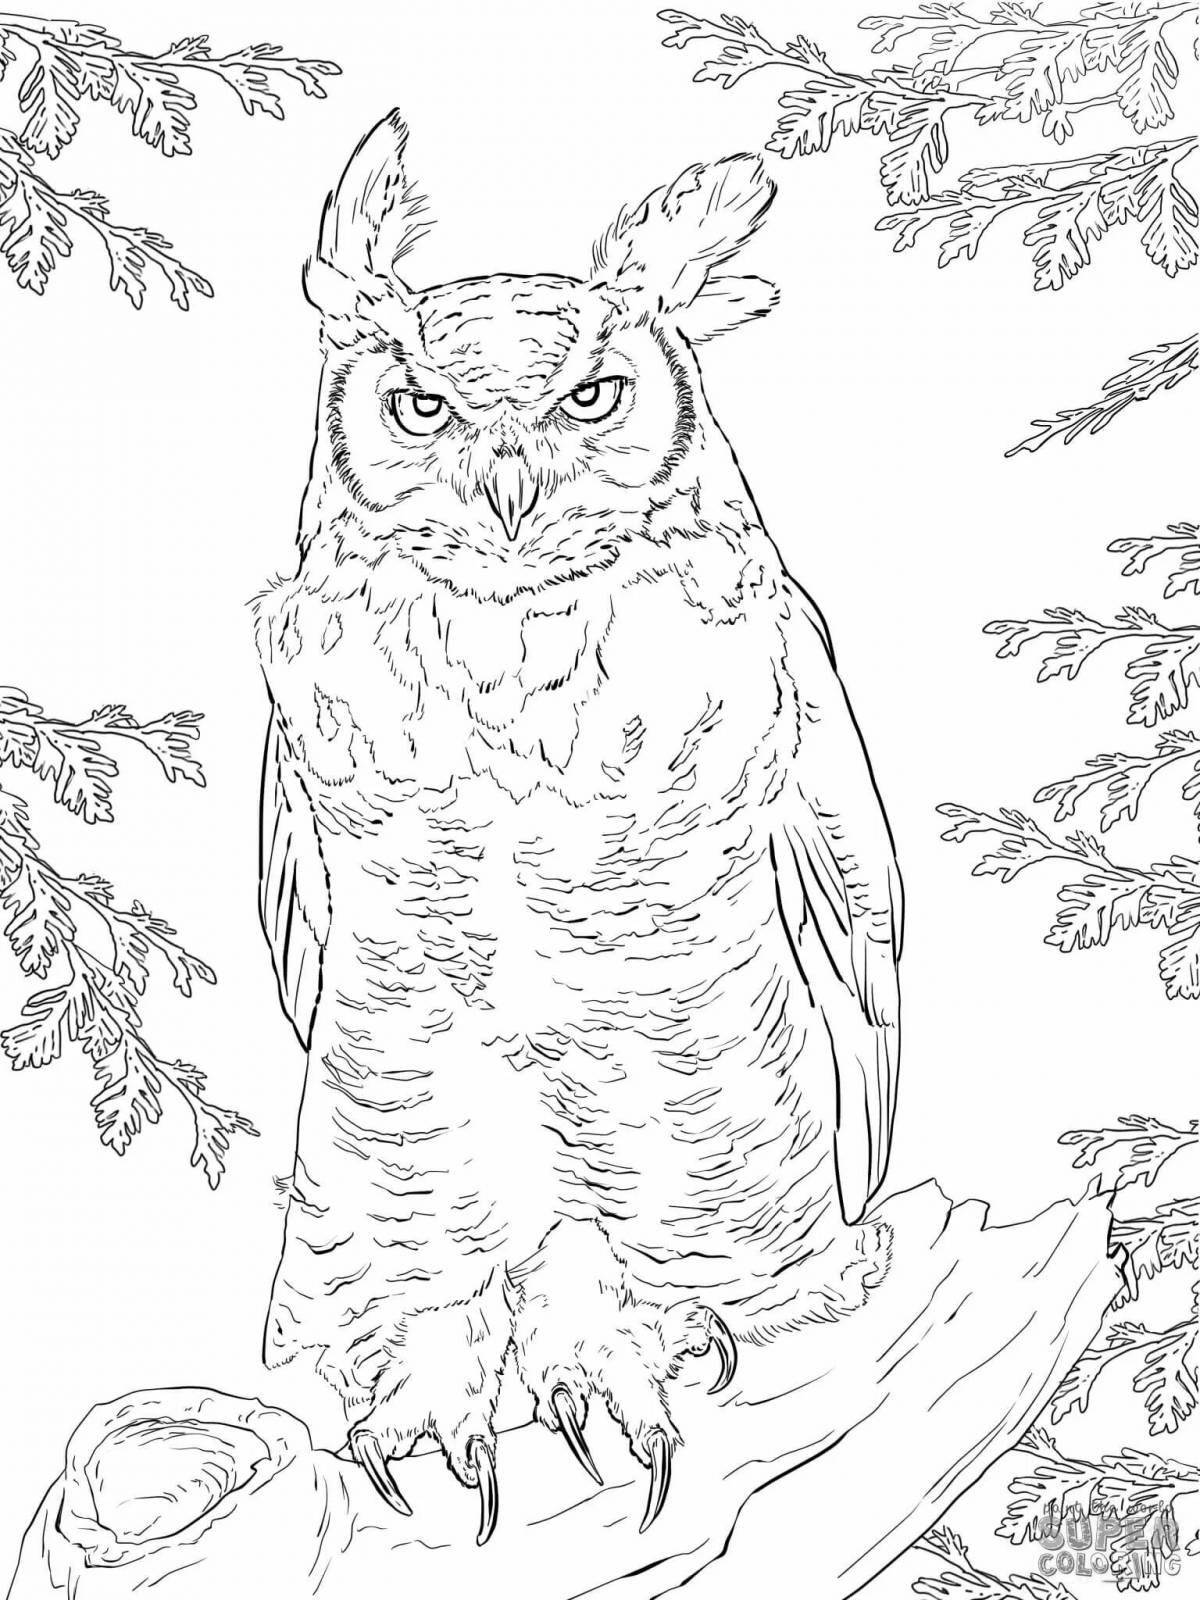 Awesome coloring pages with realistic animals